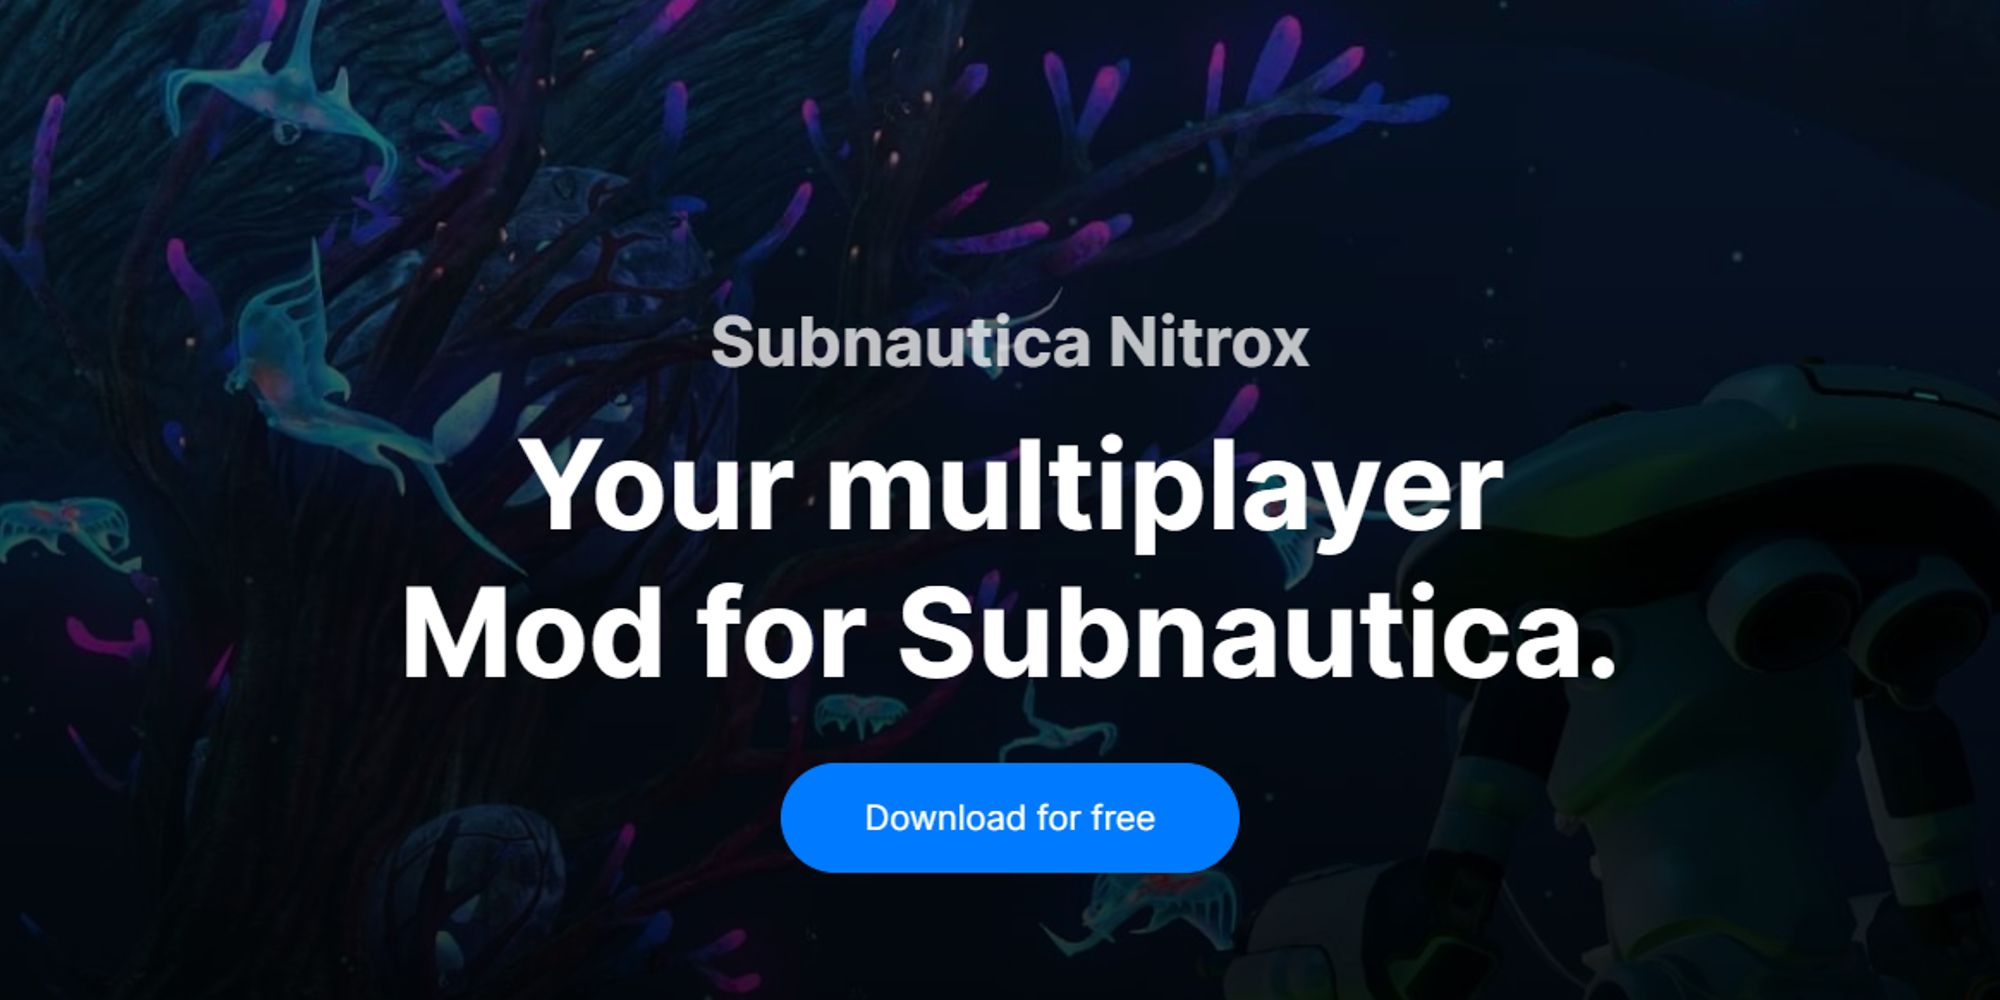 A screenshot of the Nitrox website that lets you download the multiplayer mod for Subnautica